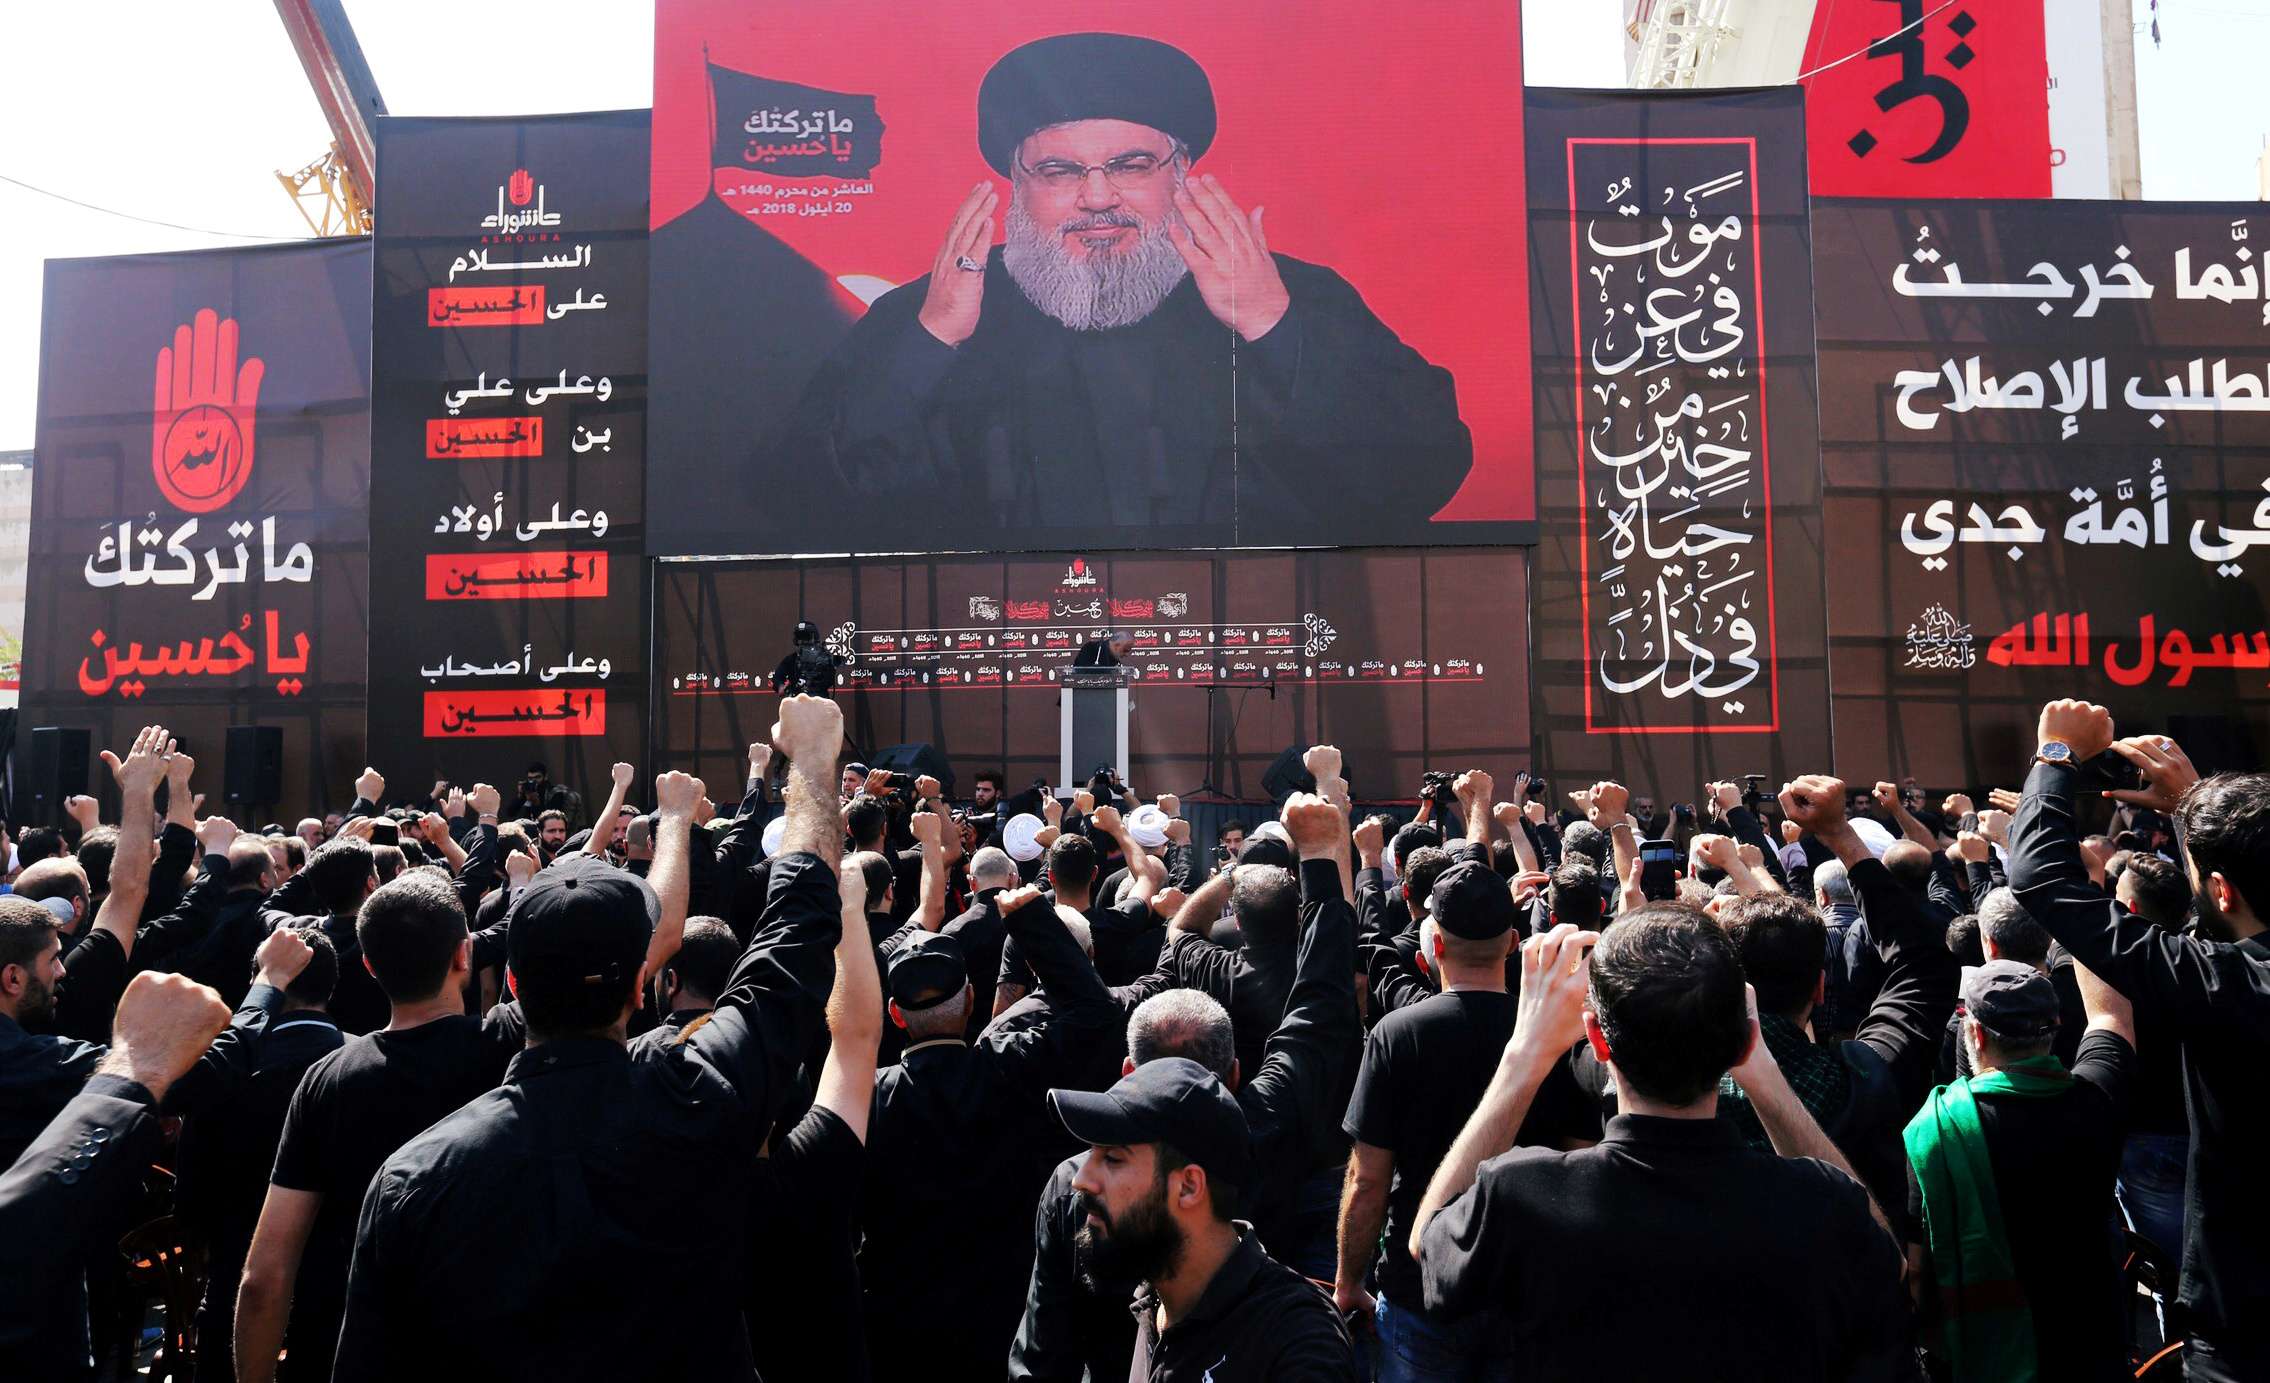 Hezbollah leader Sayyed Hassan Nasrallah addresses supporters via a screen in Beirut